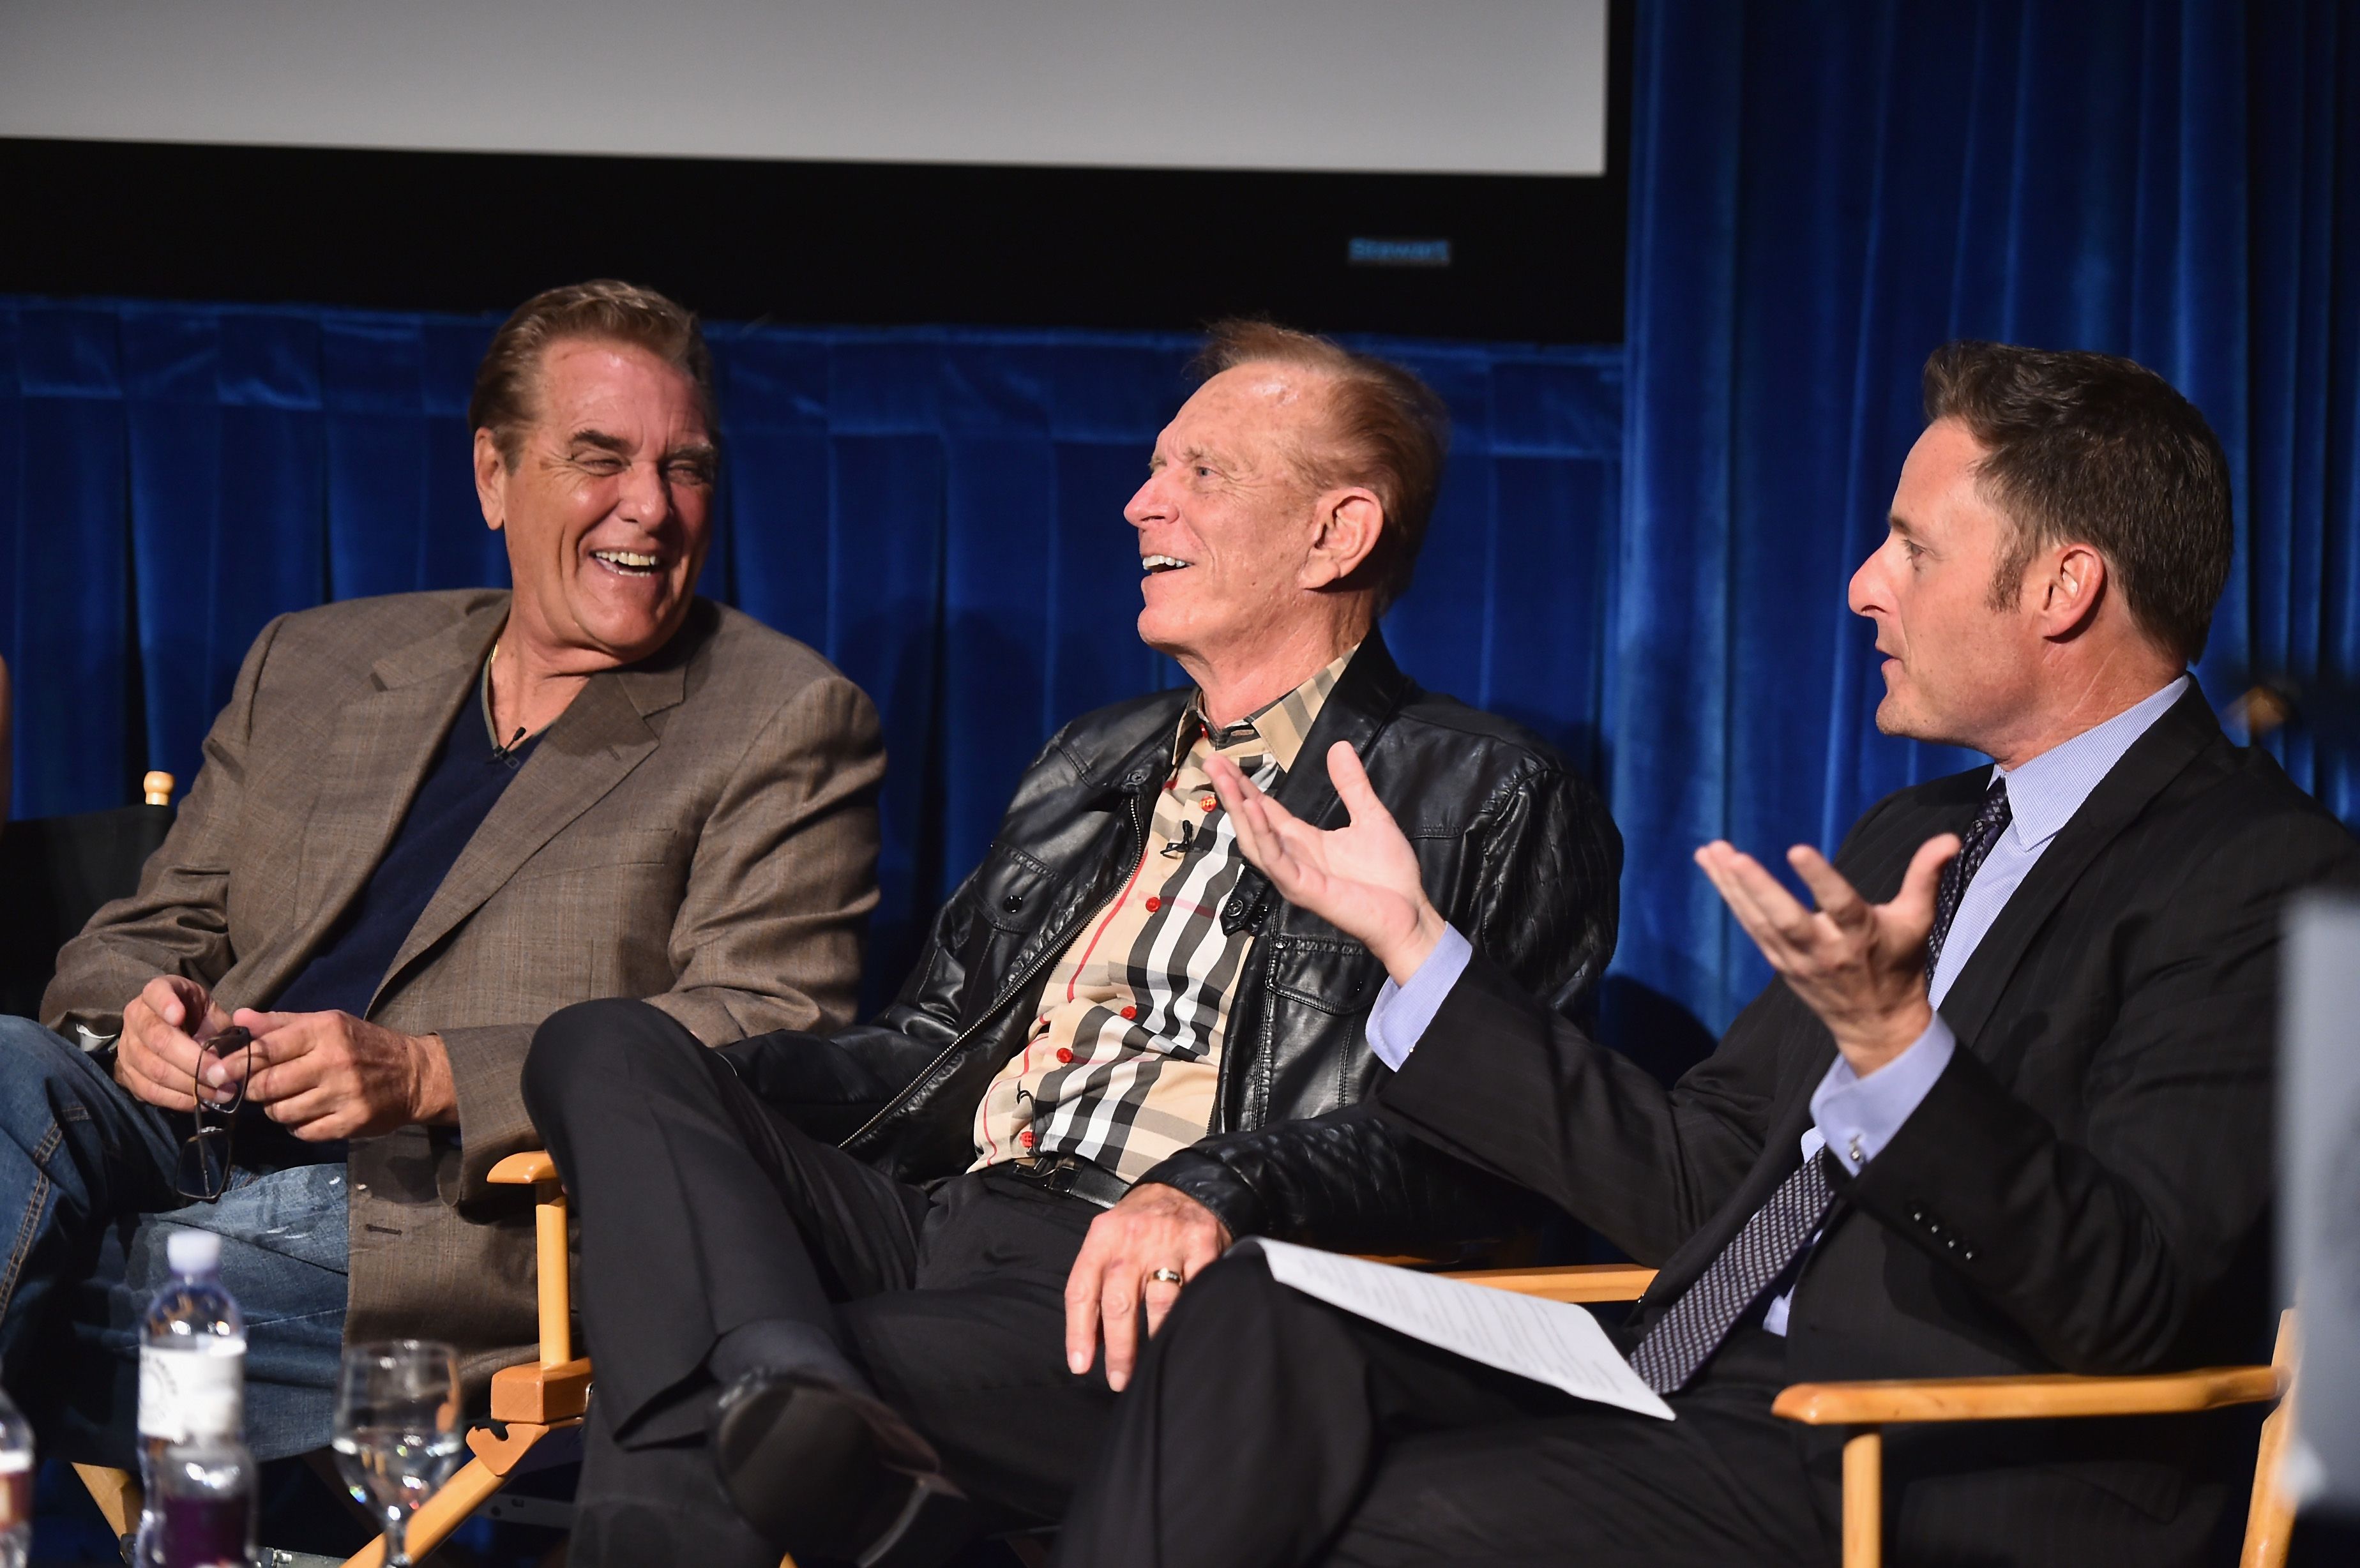 Chuck Woolery, Bob Eubanks, and Chris Harrison sit in director's chairs.